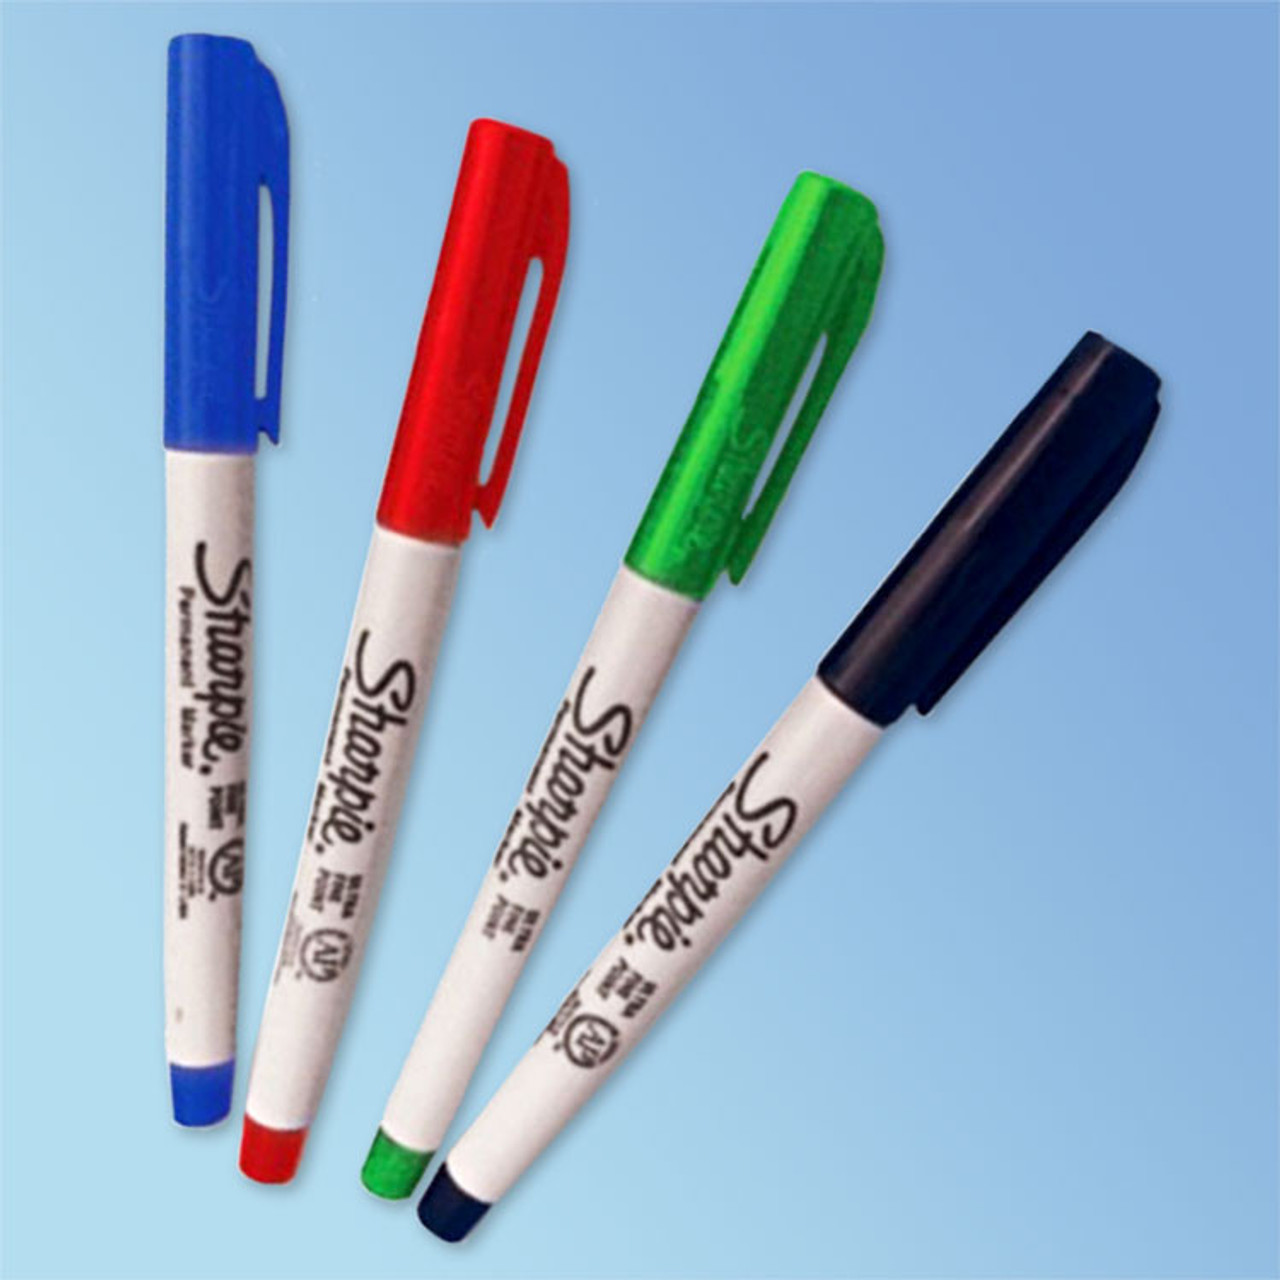 https://cdn11.bigcommerce.com/s-sb8f5ei7ew/images/stencil/1280x1280/products/9187/25519/columbia-cleanroom-sharpie-cleanroom-markers-ultra-fine-point-12pack__22552.1668803214.jpg?c=2